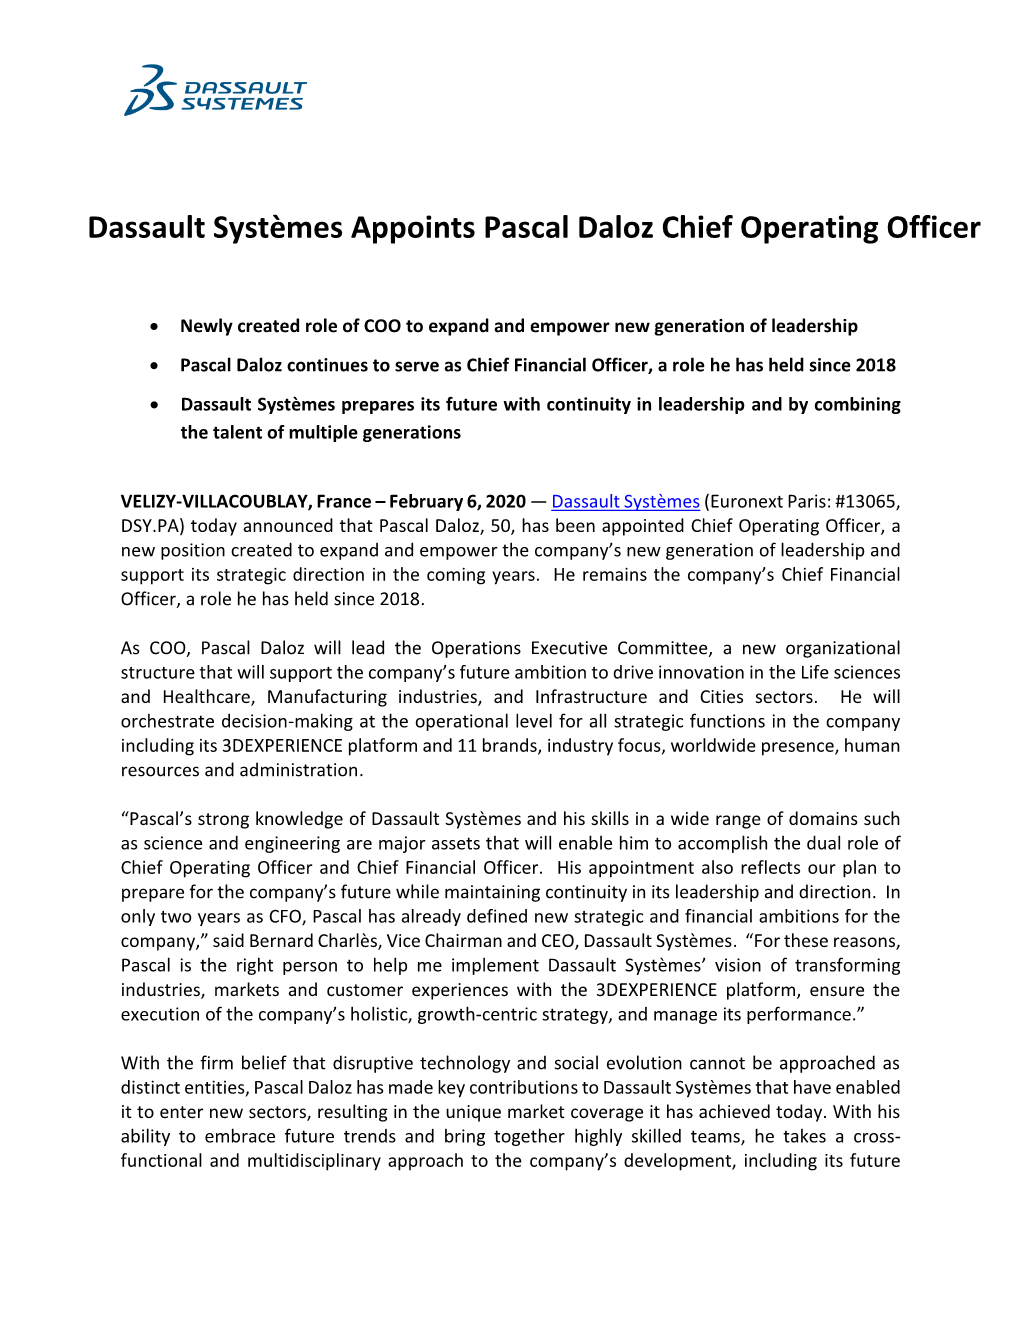 Dassault Systèmes Appoints Pascal Daloz Chief Operating Officer